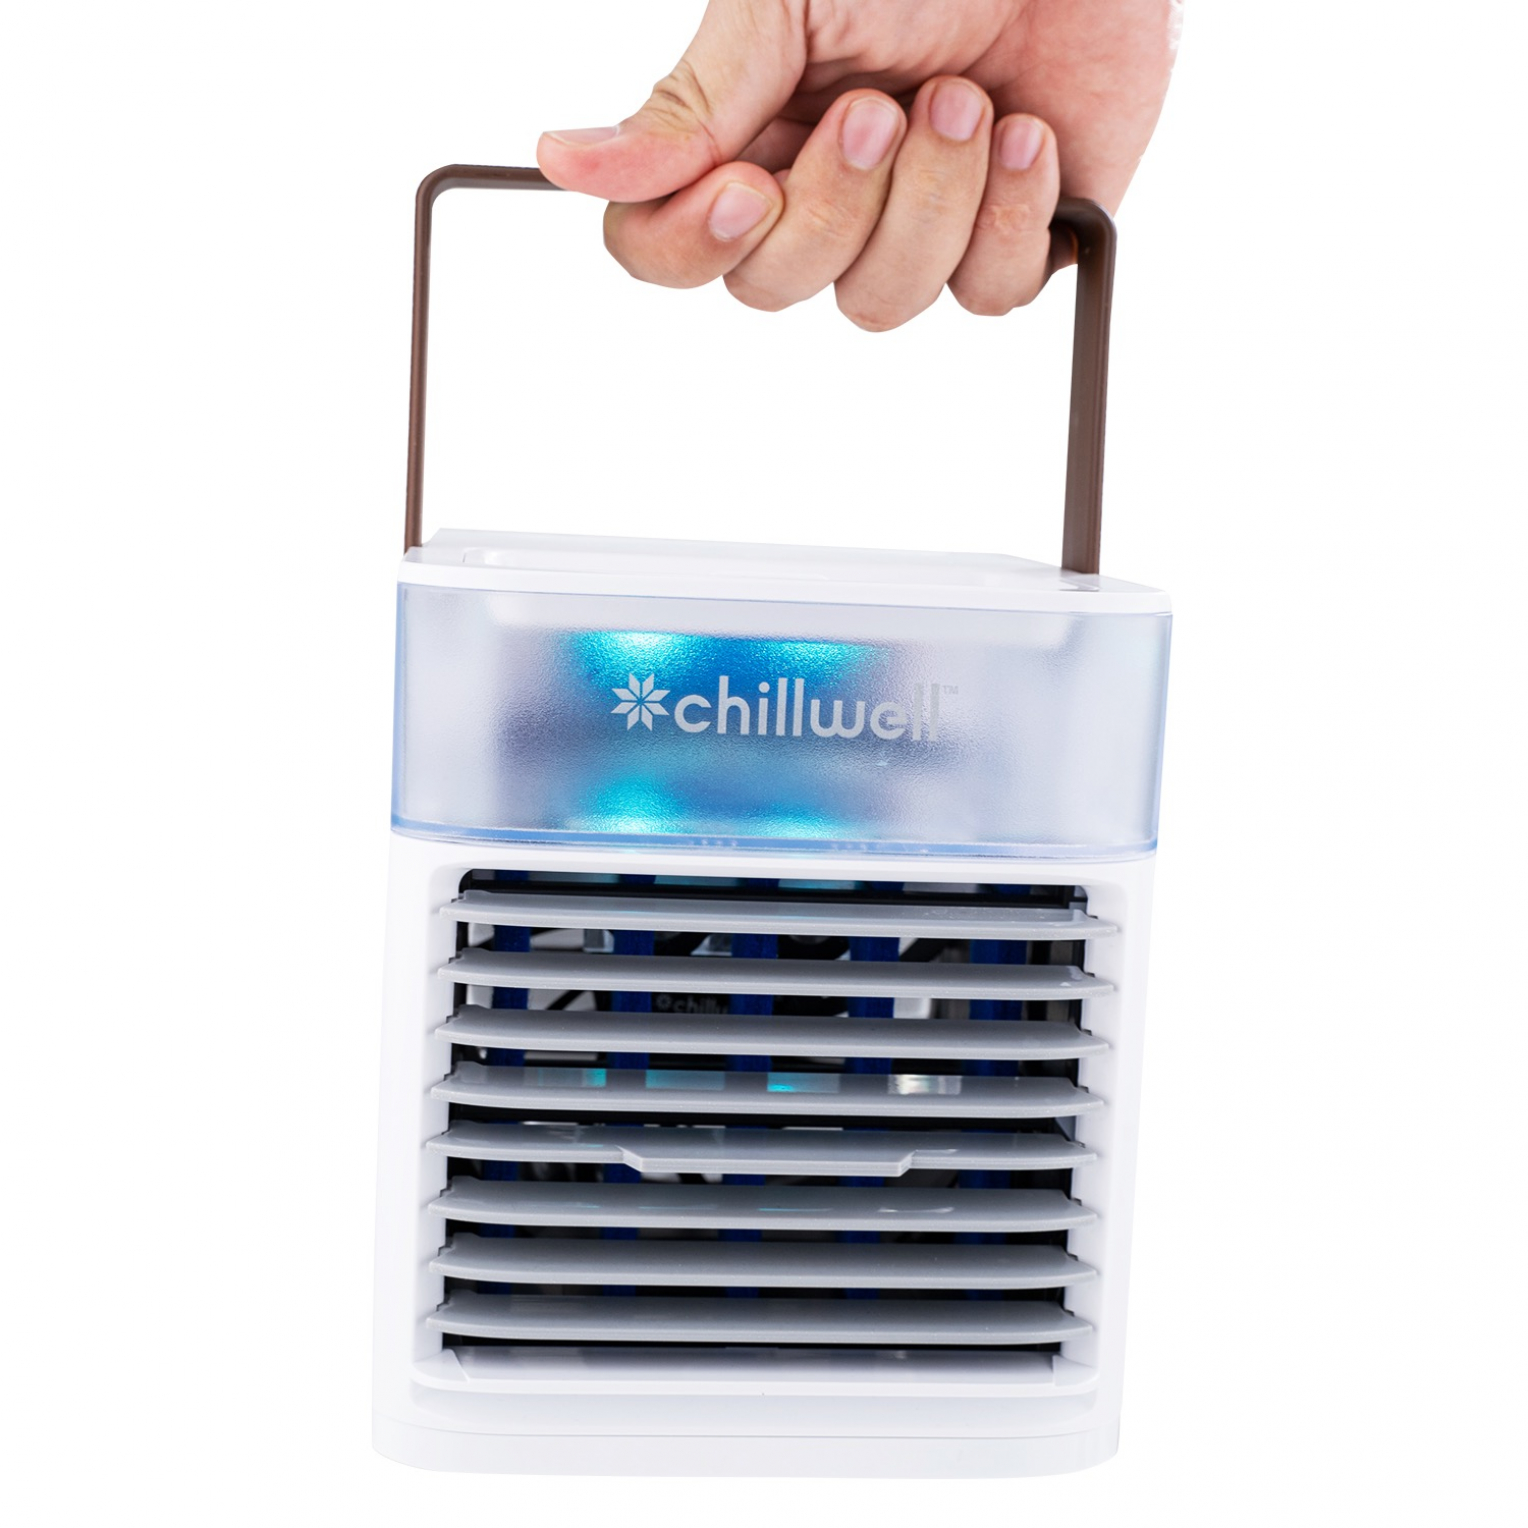 Where Can I Buy Chillwell AC Near Me